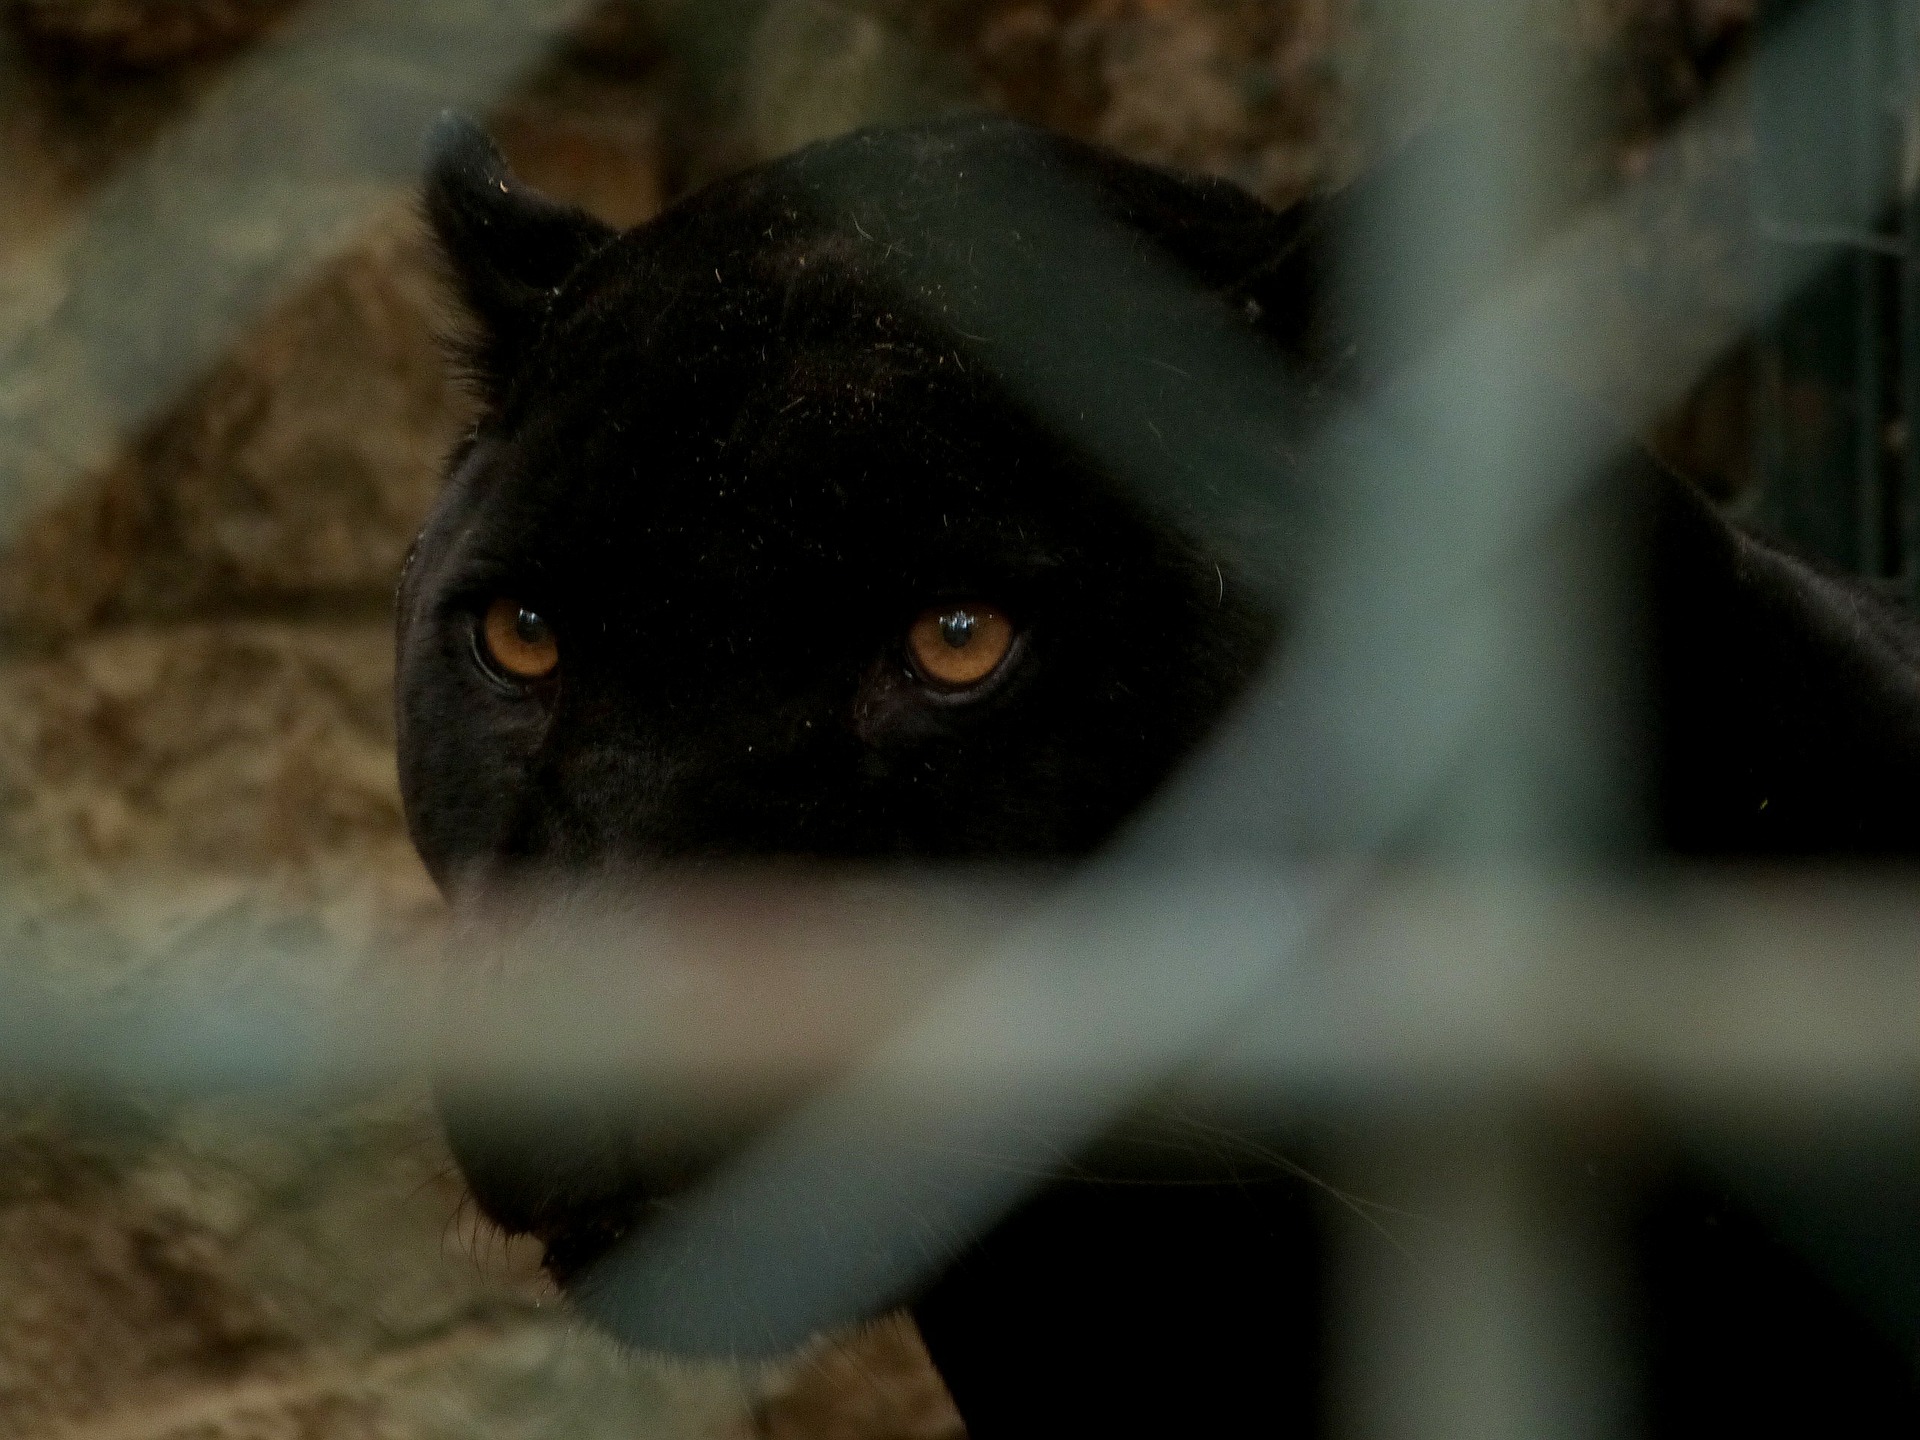 Black Panther Seen Again, This Time in Kecskemét